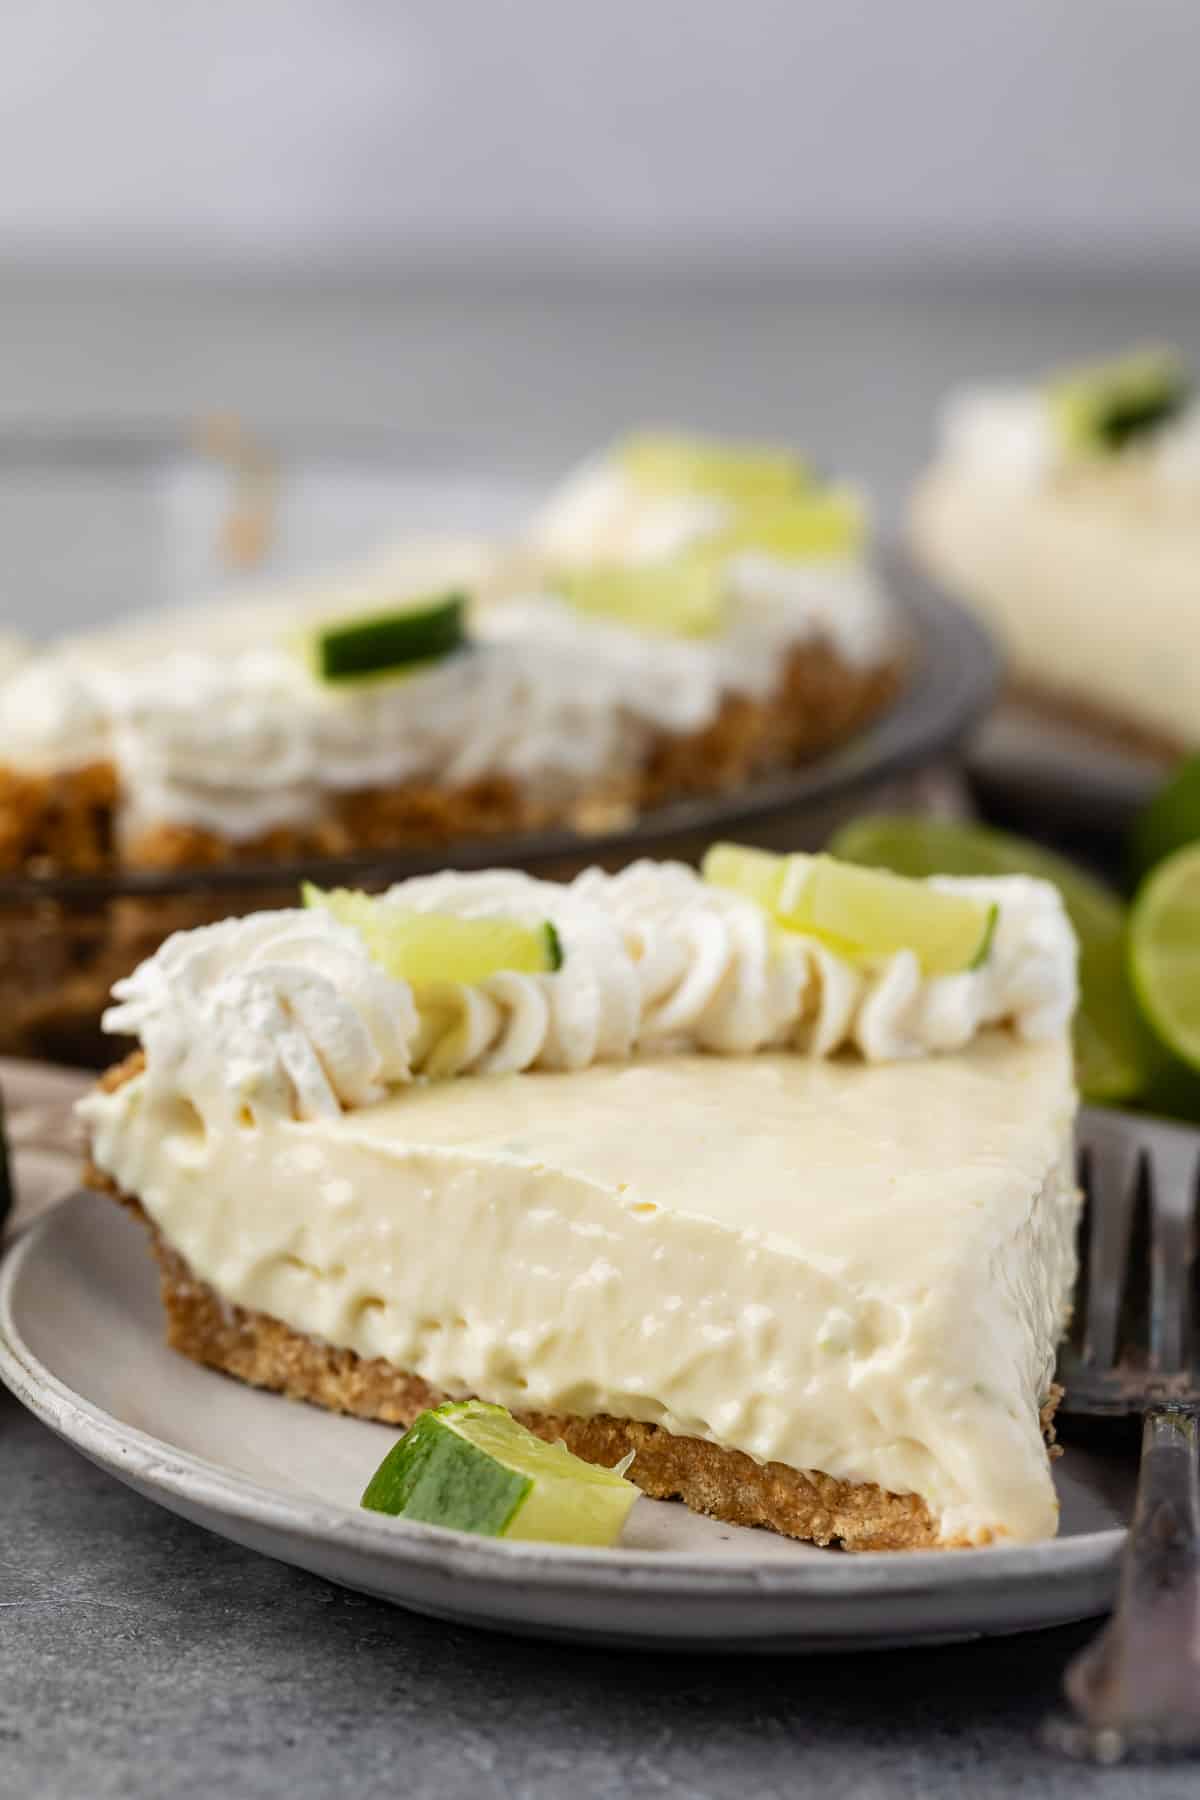 slice of key lime pie with whipped cream and sliced lime on top.